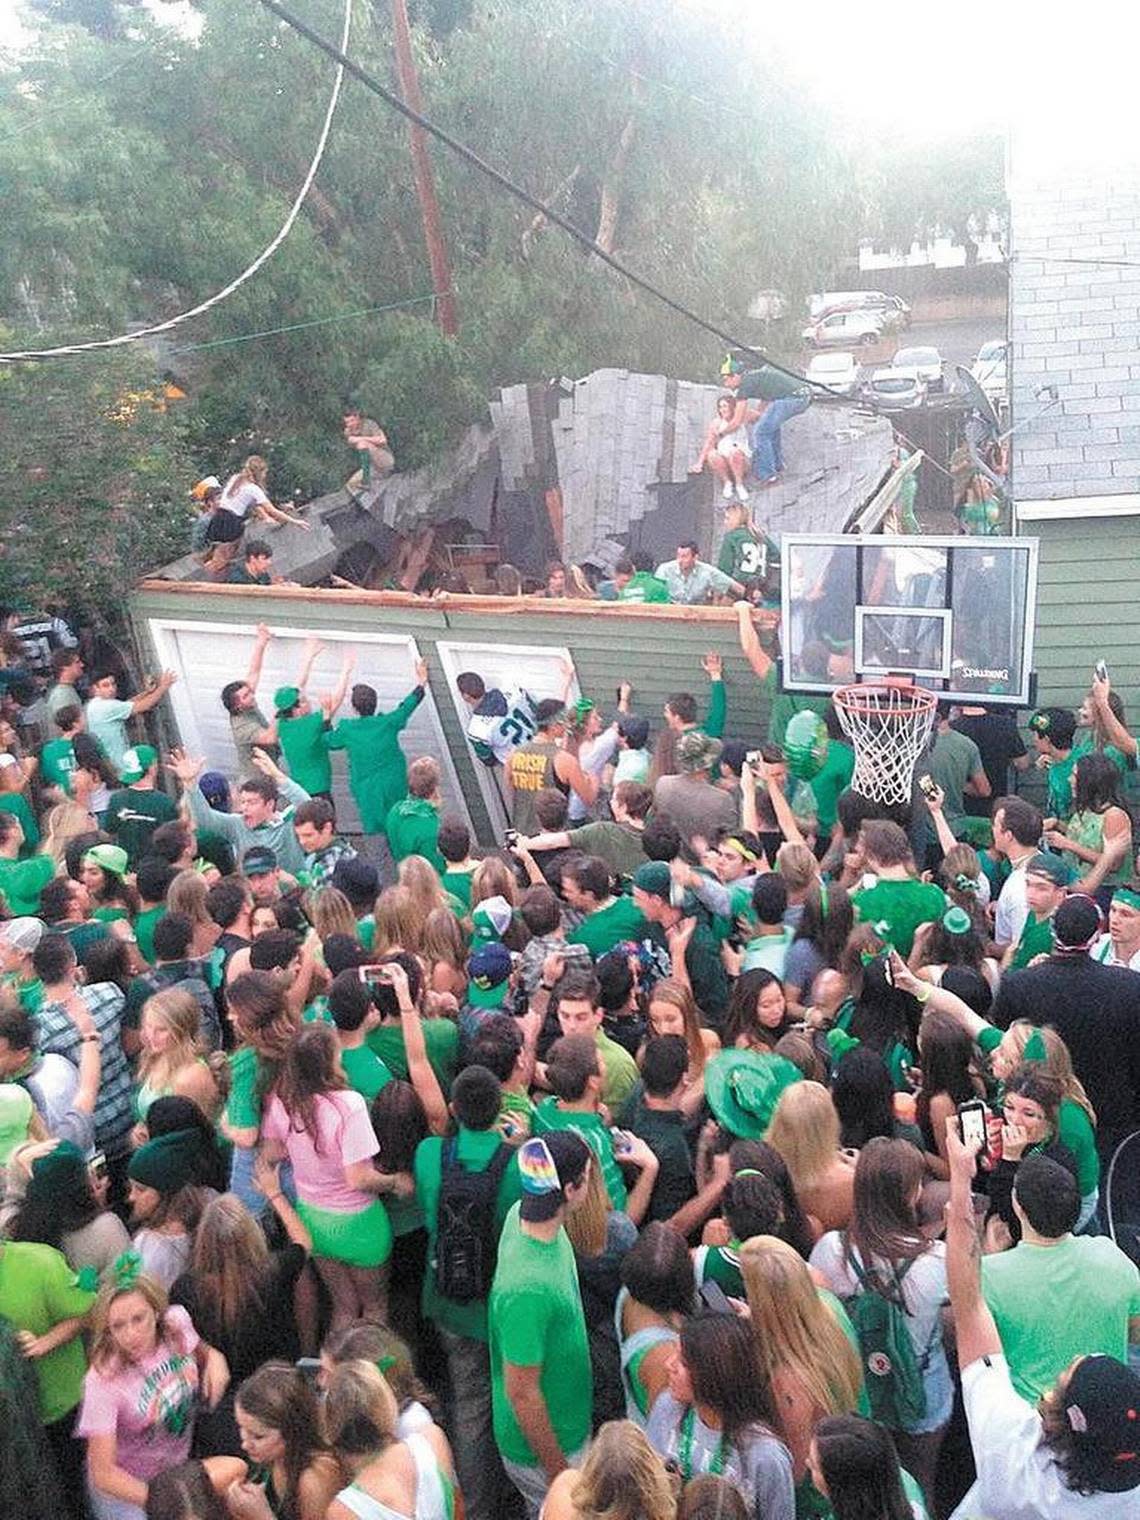 Partiers fall as a garage roof collapses during March 2015 St. Fratty’s Day celebrations at 348 Hathway in San Luis Obispo.